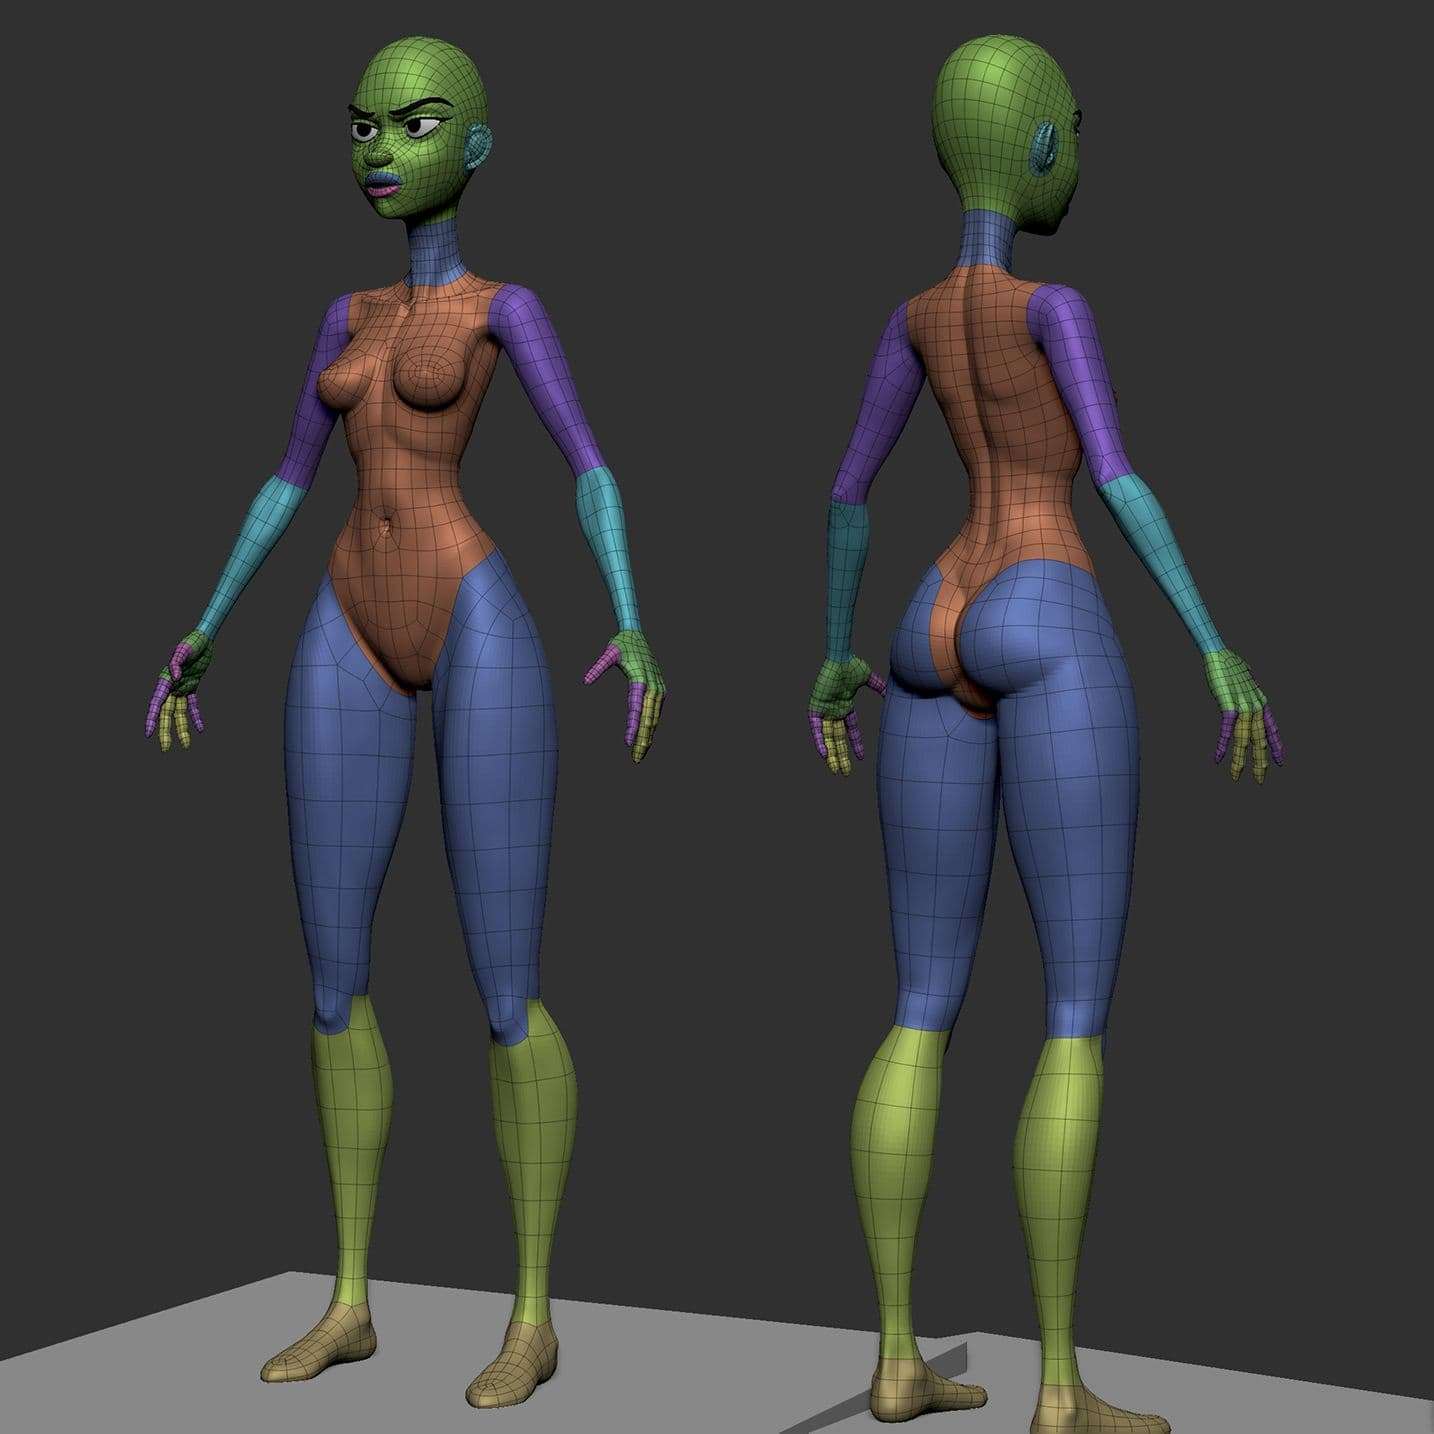 Sculpting Stylized Female Character In Blender - Sculpting Process  Timelapse 